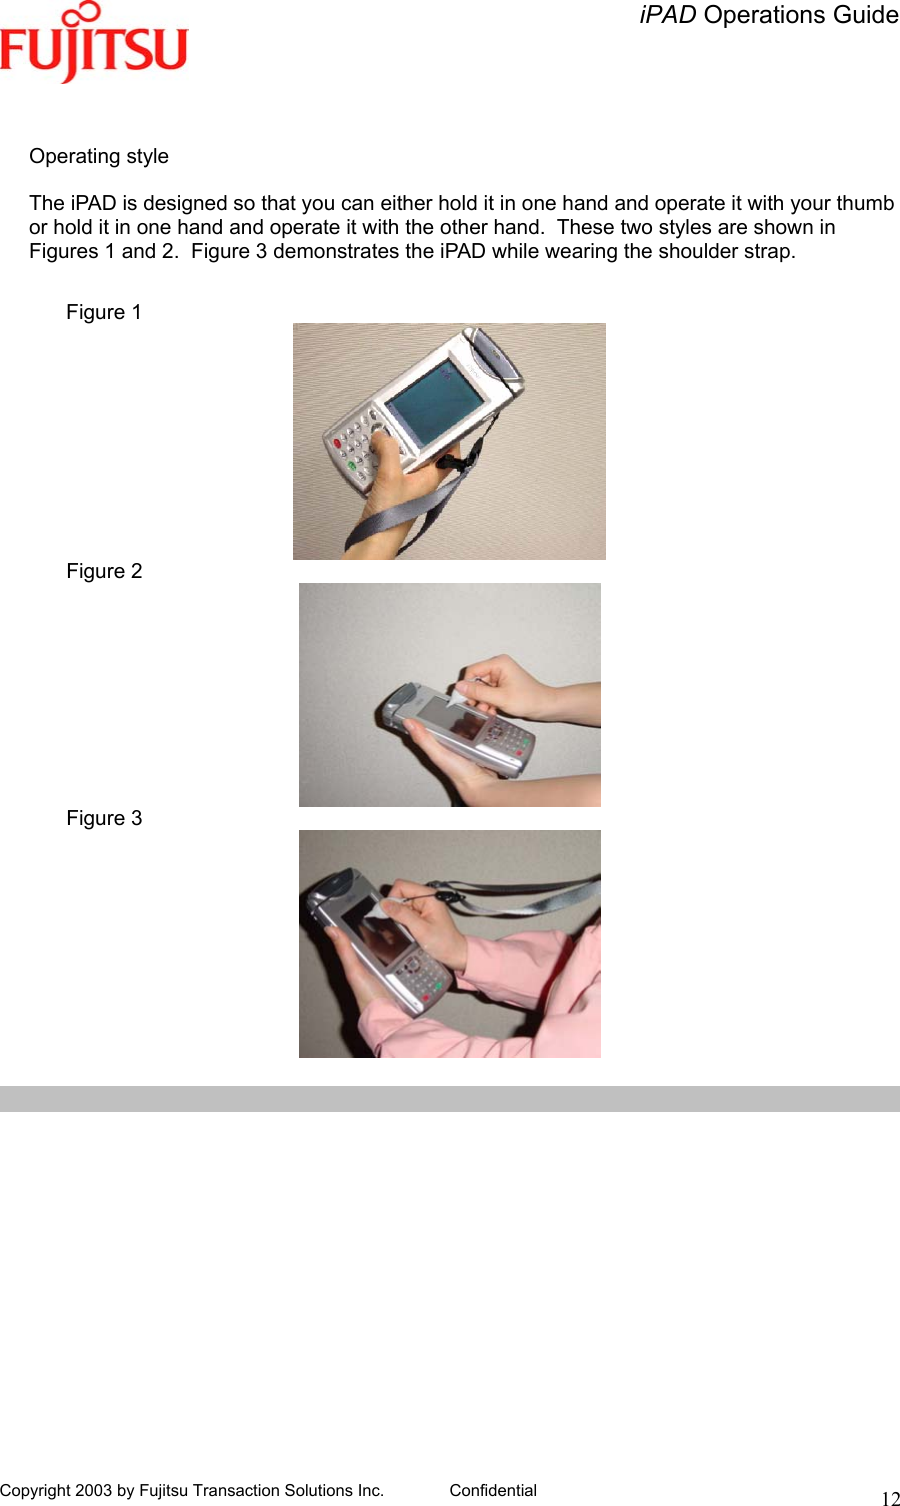   iPAD Operations Guide   Copyright 2003 by Fujitsu Transaction Solutions Inc. Confidential  12  Operating style  The iPAD is designed so that you can either hold it in one hand and operate it with your thumb or hold it in one hand and operate it with the other hand.  These two styles are shown in Figures 1 and 2.  Figure 3 demonstrates the iPAD while wearing the shoulder strap.  Figure 1  Figure 2  Figure 3   